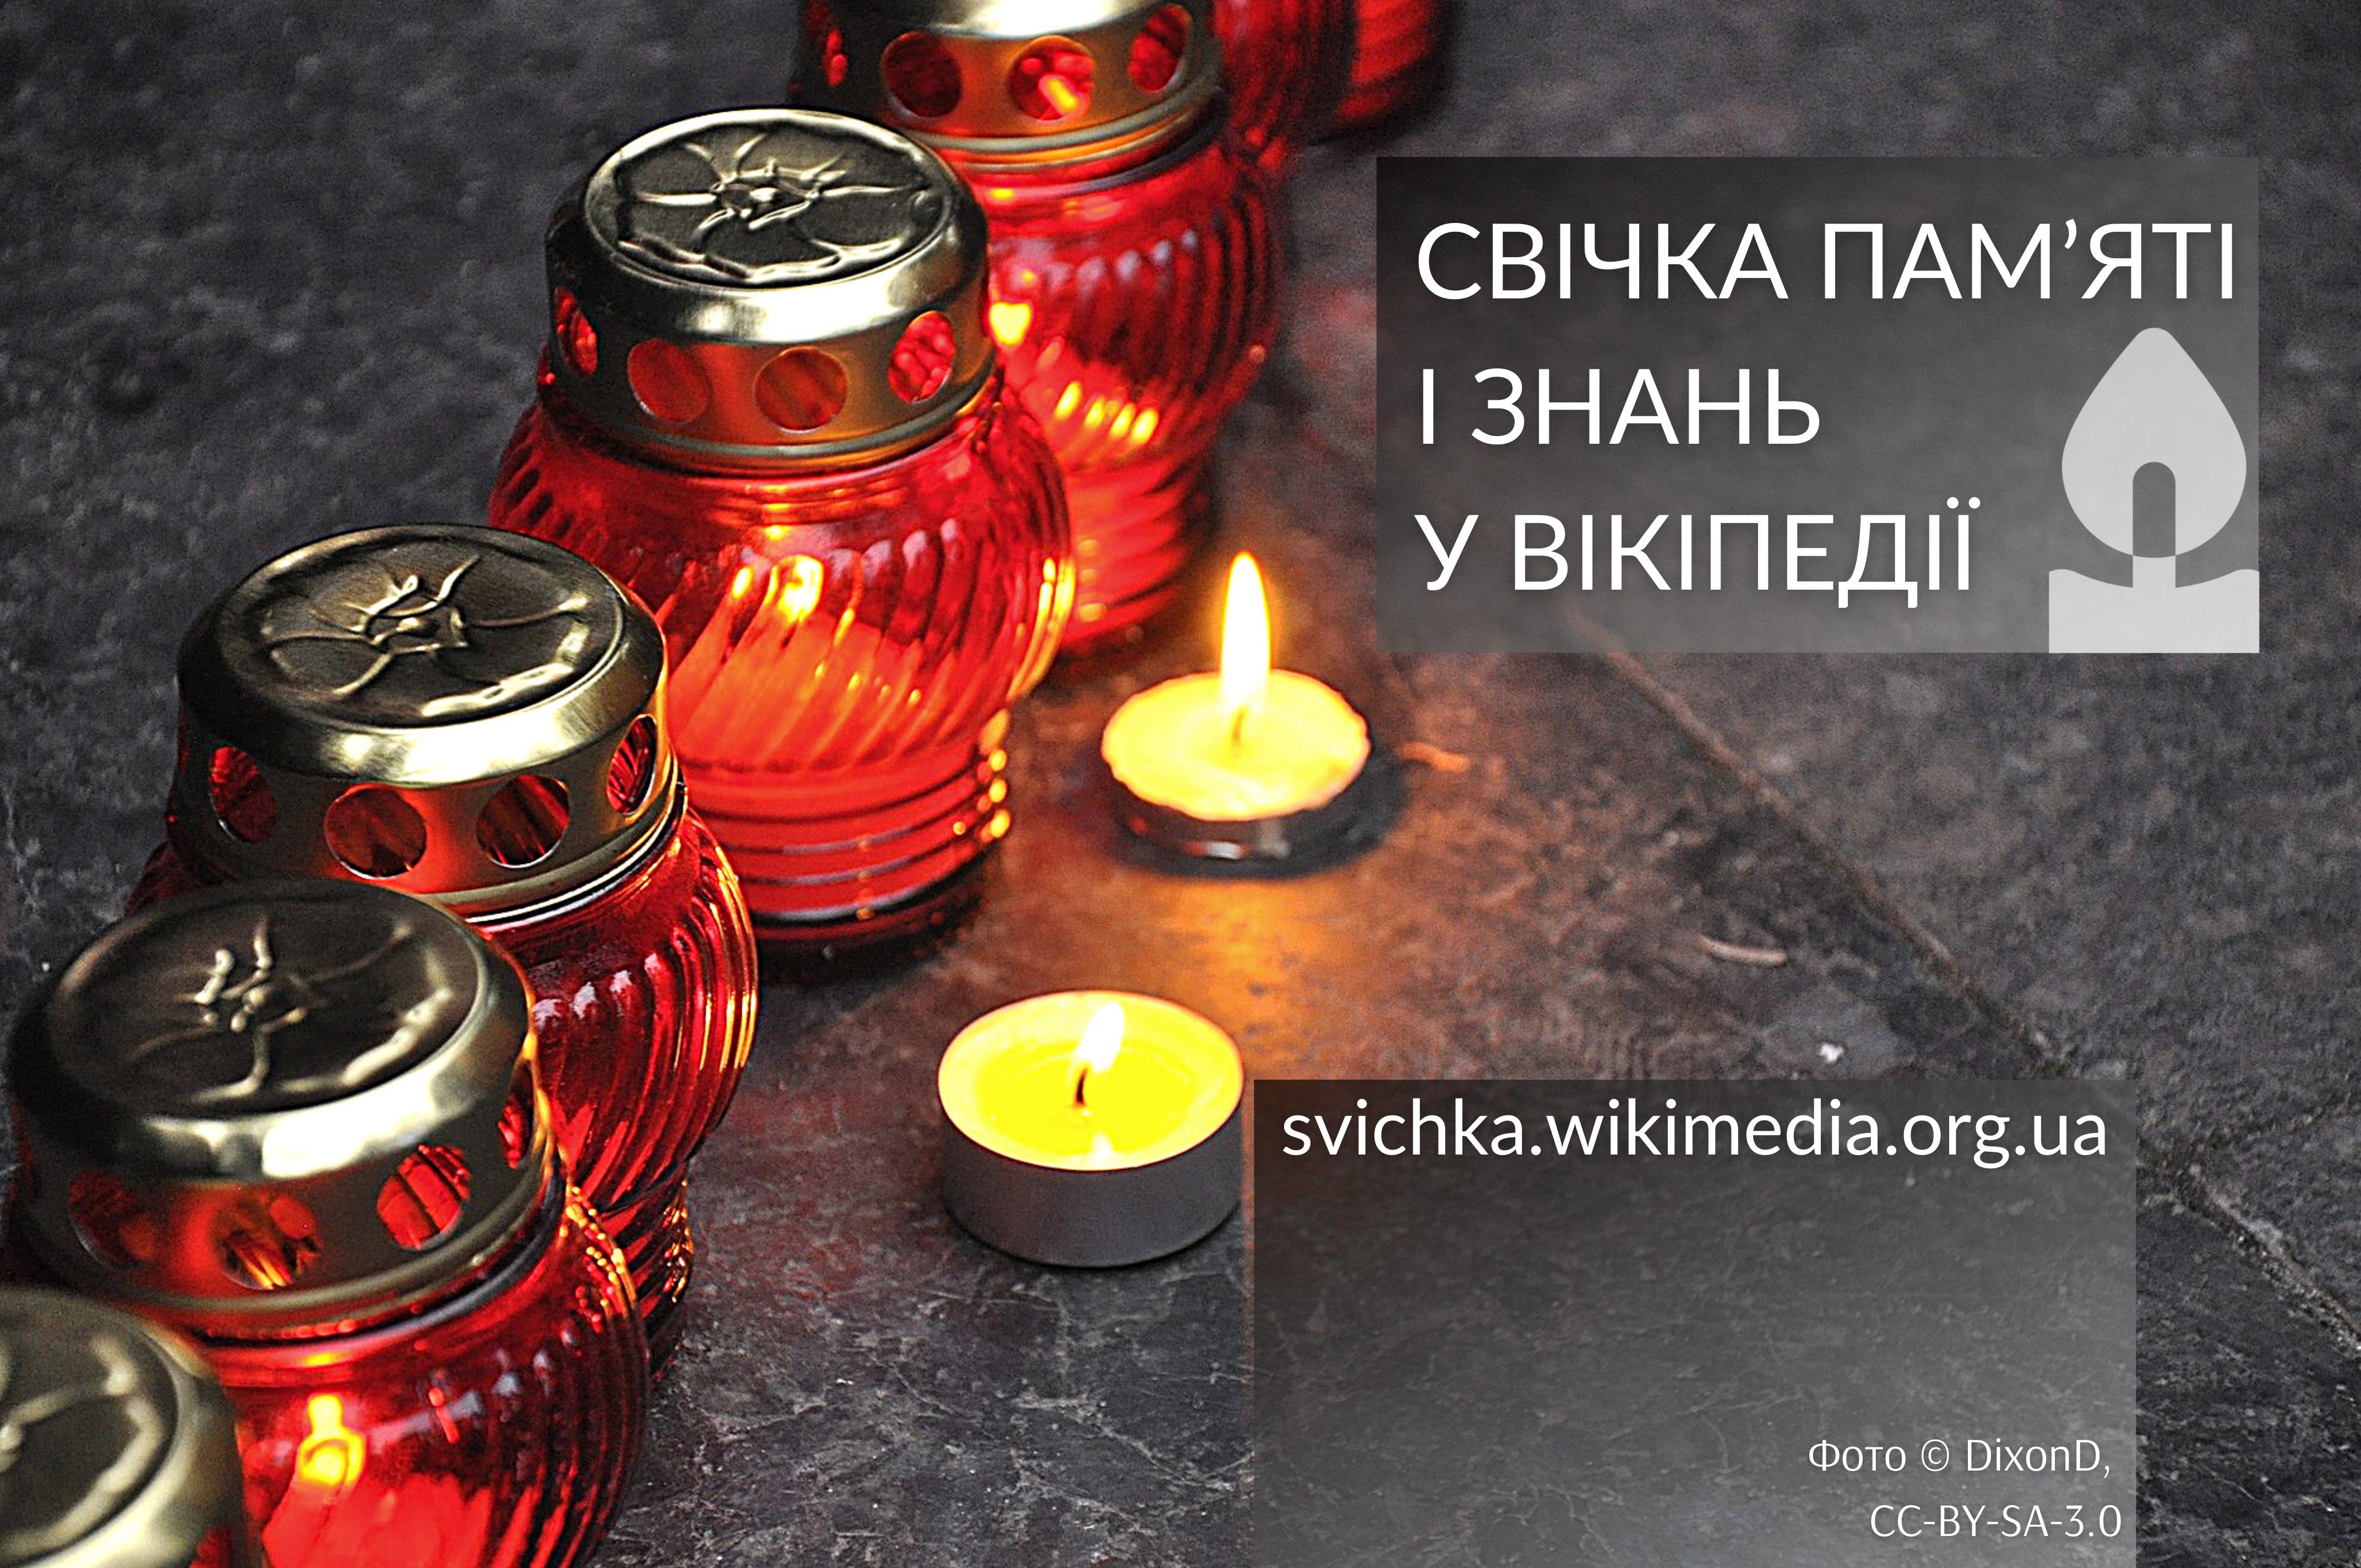 Wikipedia Calls for Disseminating the Truth about the Holodomor